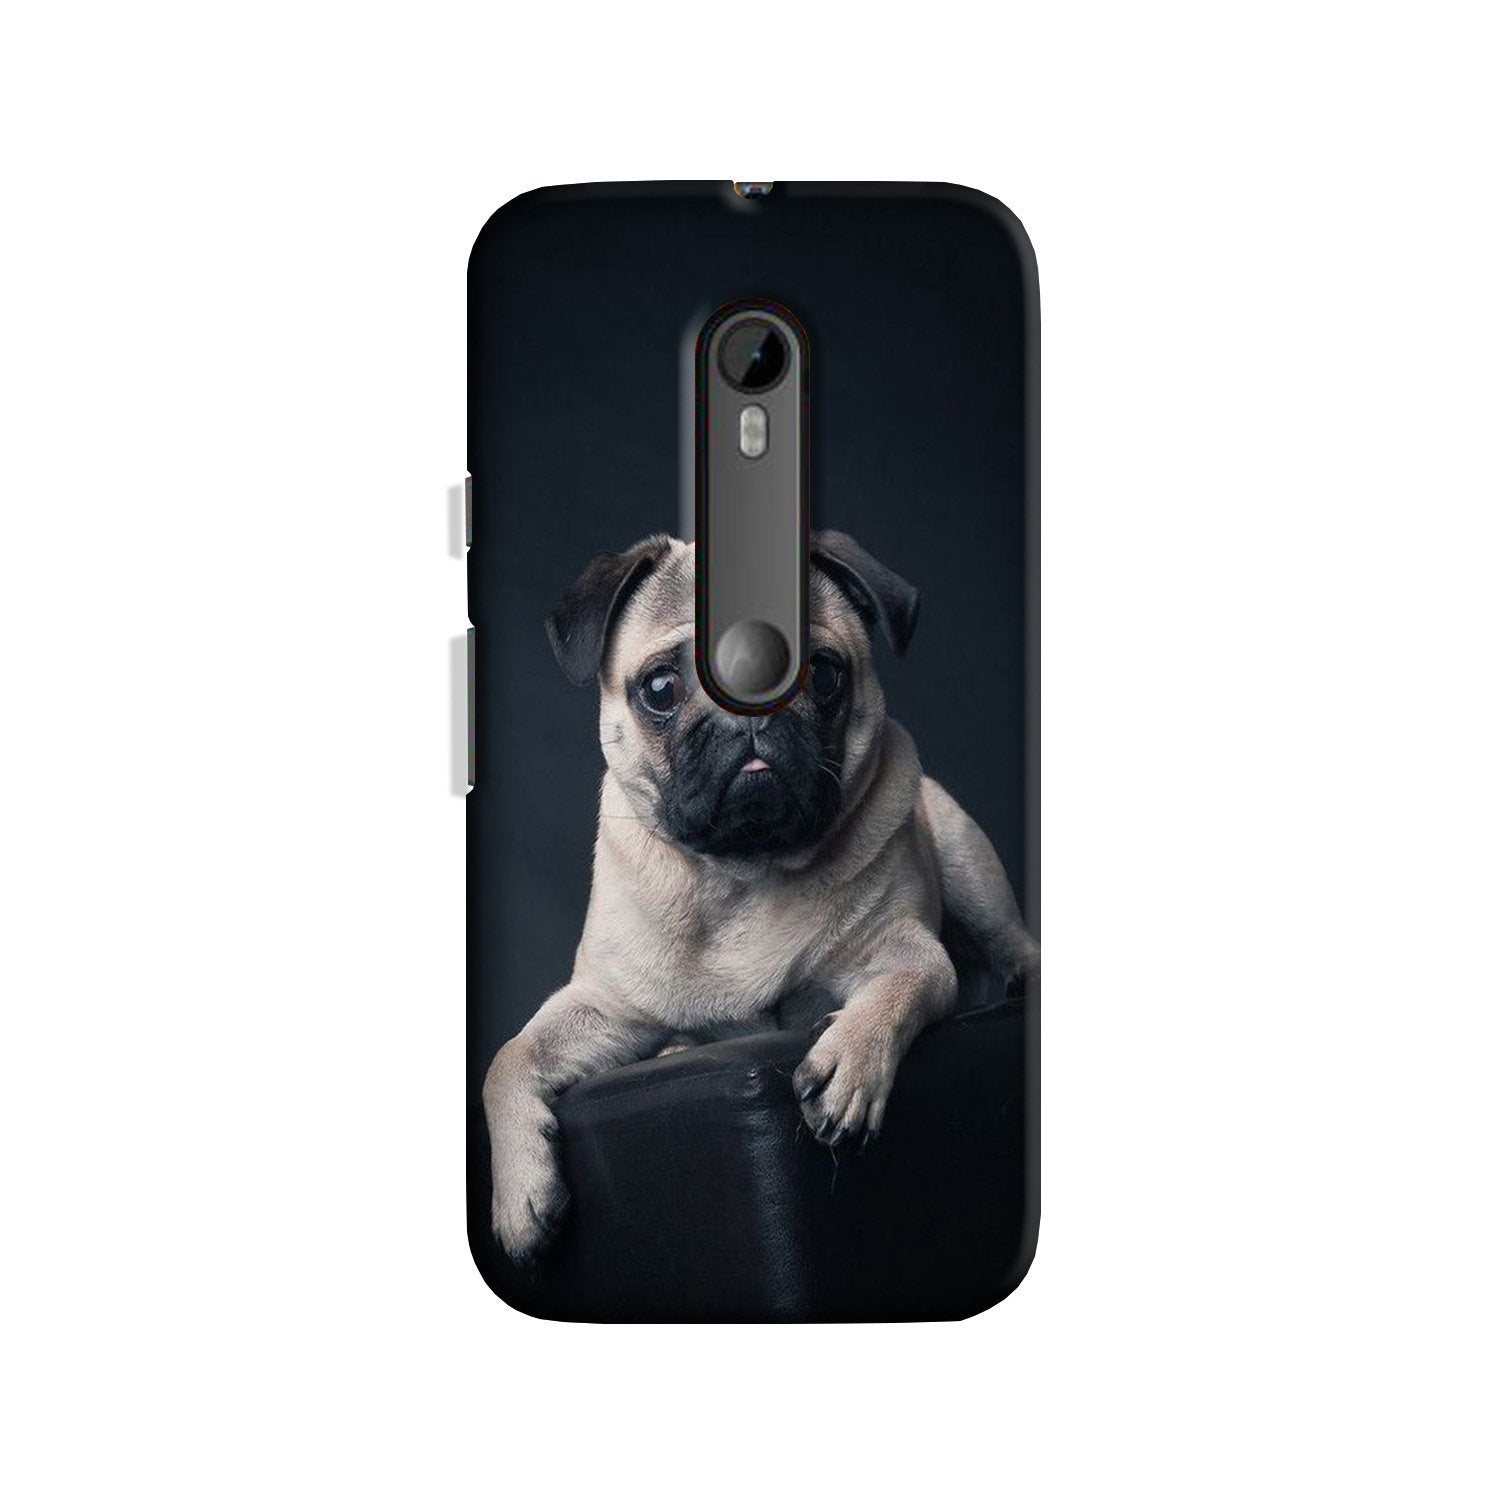 little Puppy Case for Moto X Play